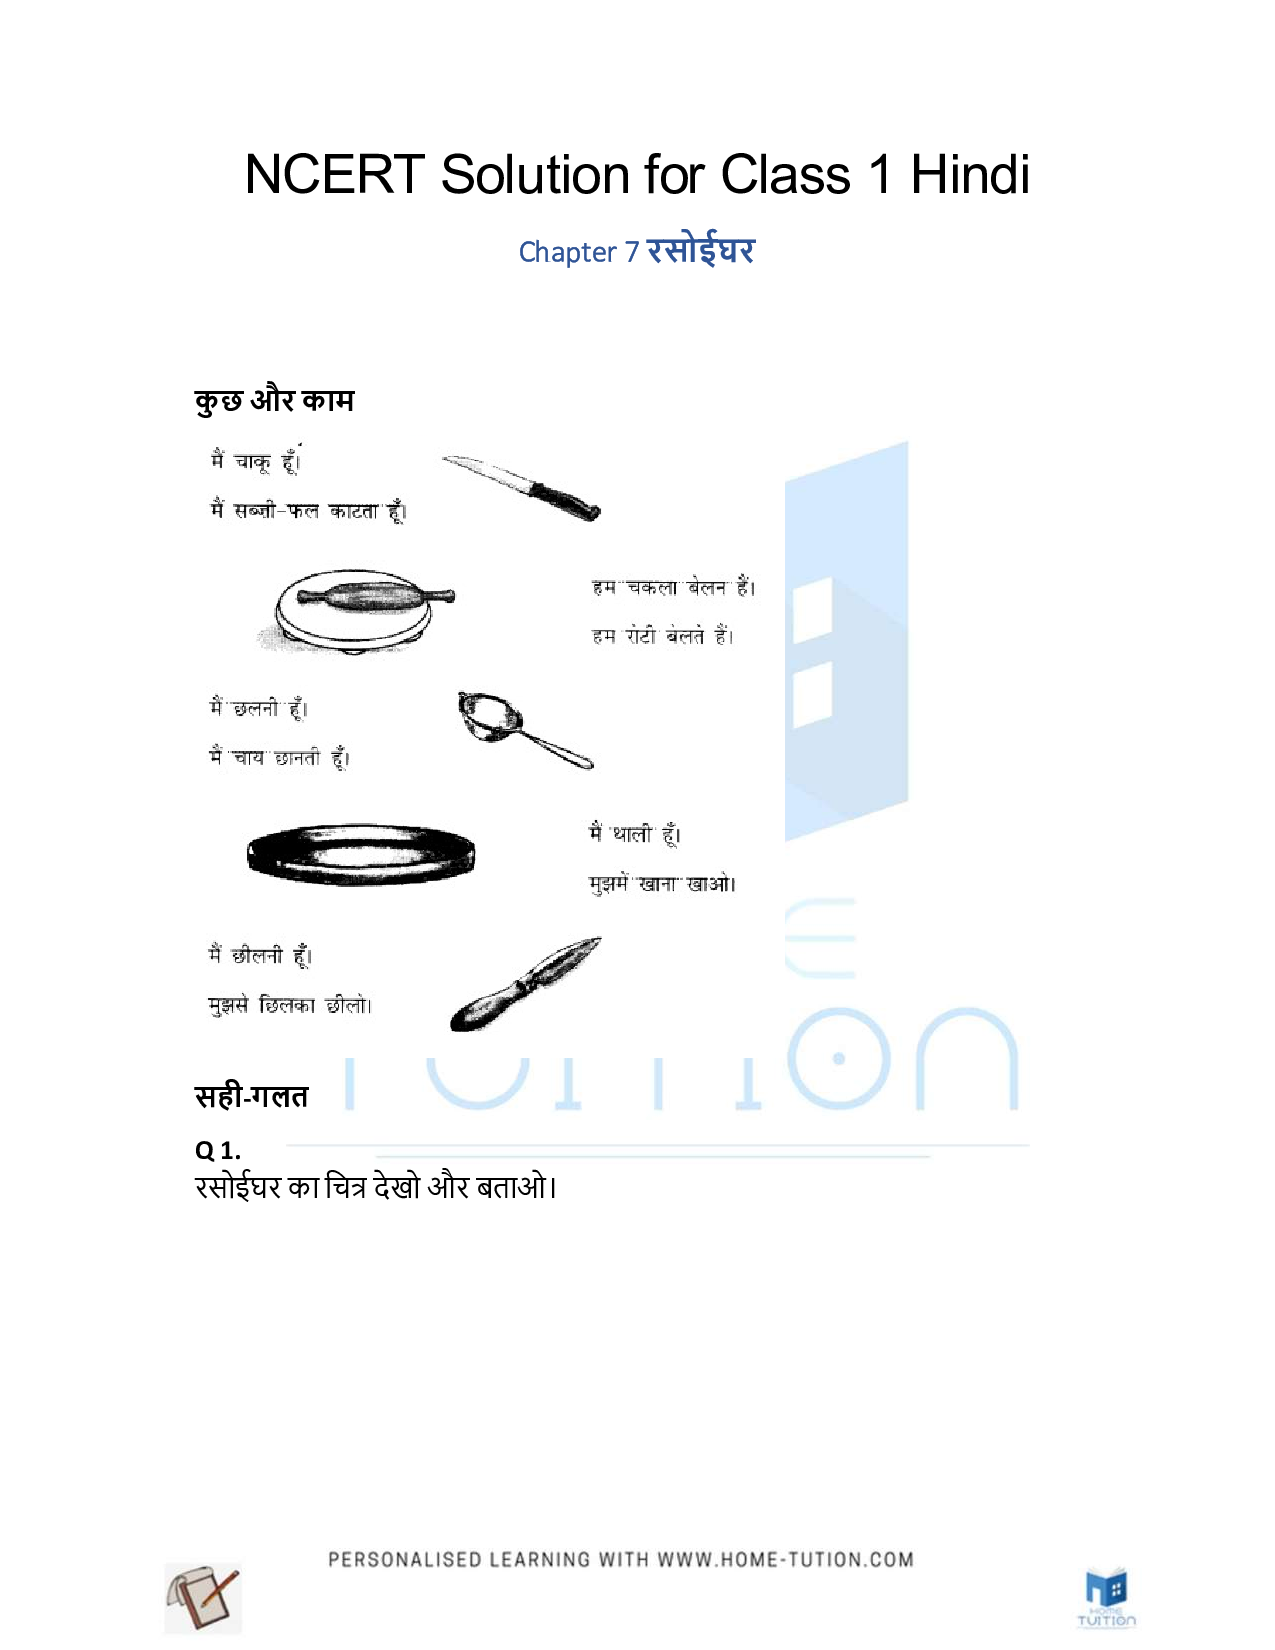 NCERT Solution for Class 1 Hindi Chapter 7 Rasoighar(रसोईघर)